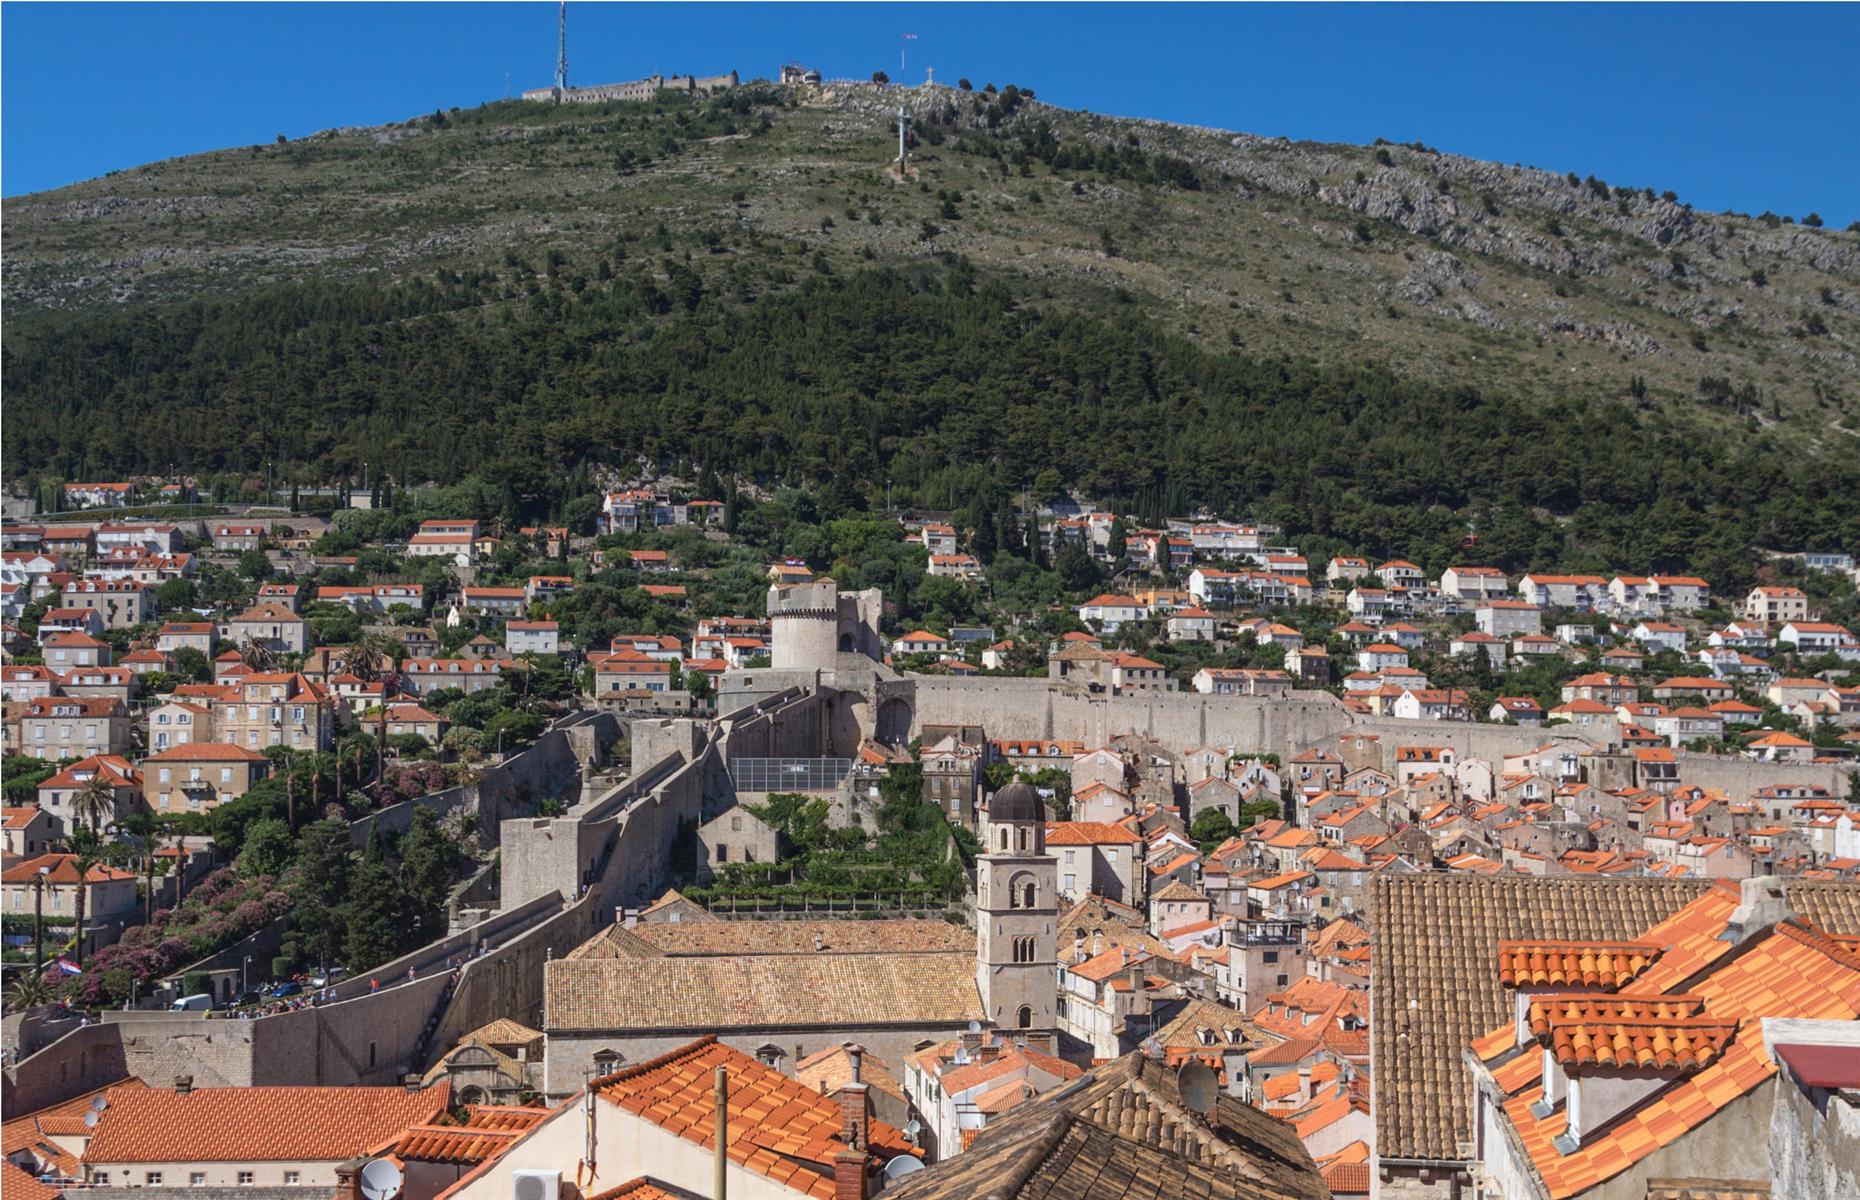 <p>Not quite soaring over Dubrovnik – at a mere 1,352 feet (412m) – Mount Srd still offers fantastic views. Board the cable car and whizz up in just a few minutes. Then take in the red roofs of the old town below, the forested island of Lokrum and the azure Adriatic stretching to the horizon. On a clear day, you can see almost 40 miles into the distance (telescopes are provided).</p>